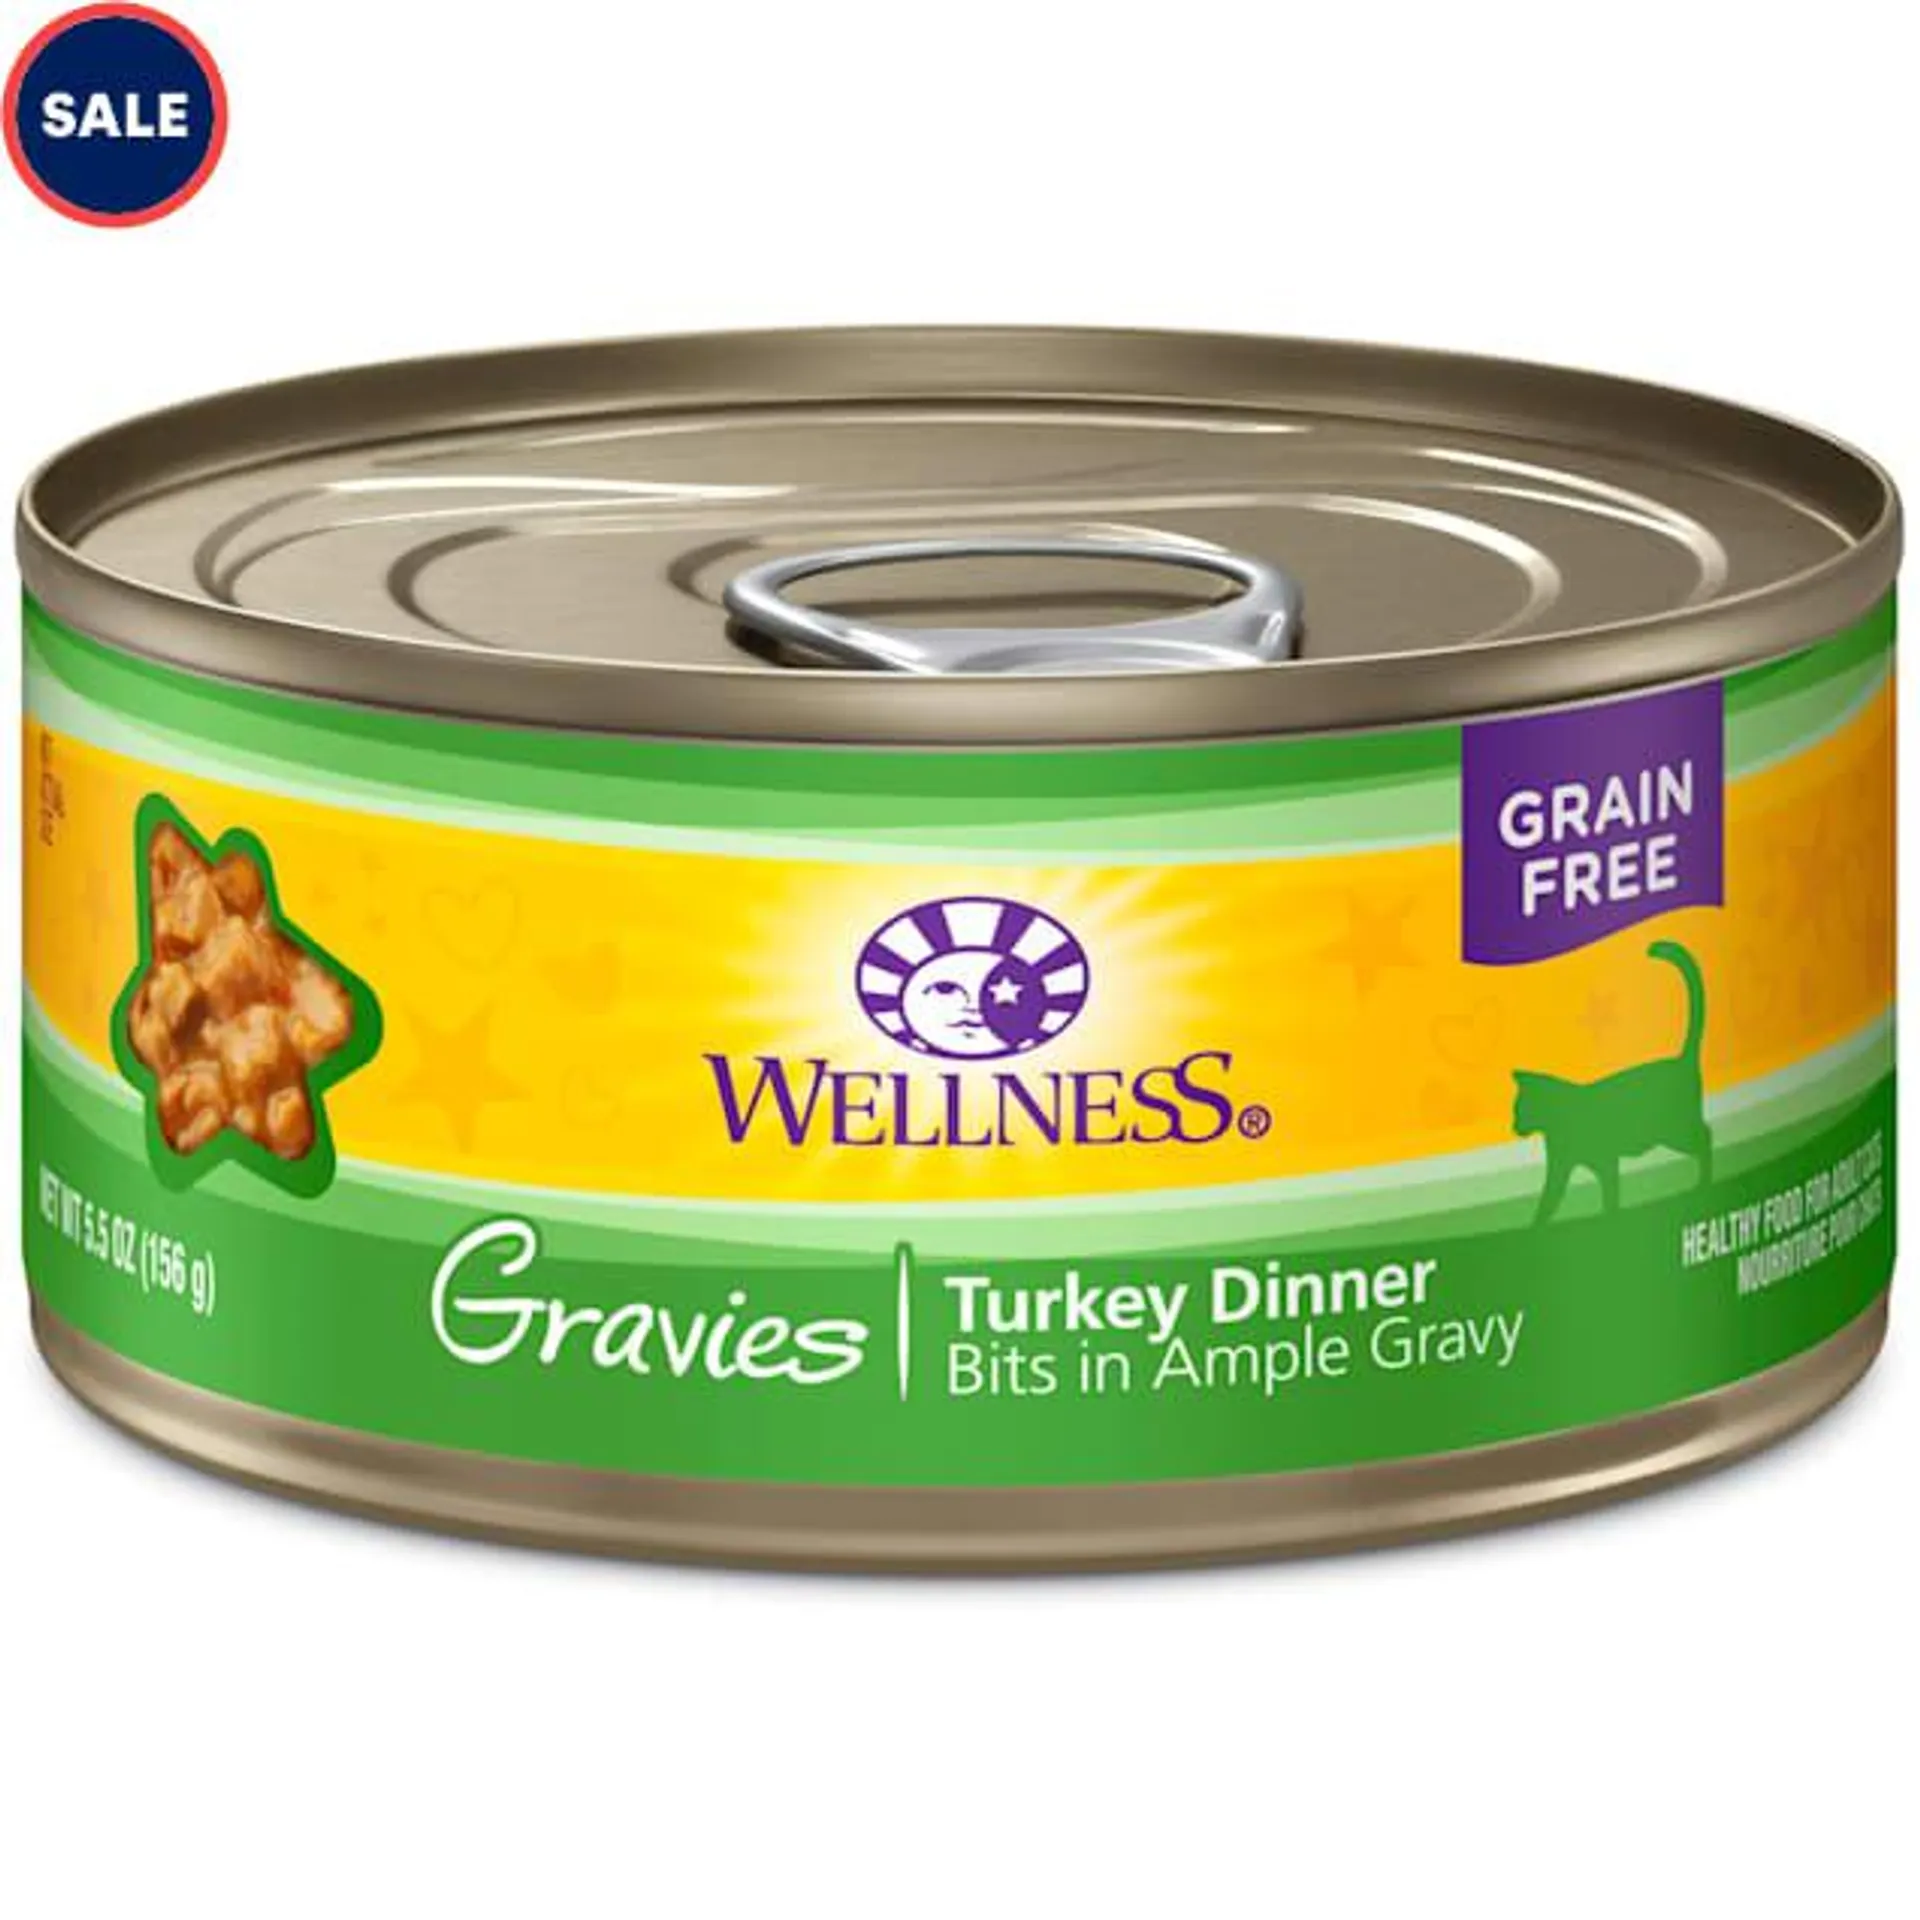 Wellness Complete Health Natural Canned Grain Free Gravies Turkey Dinner Wet Cat Food, 5.5 oz., Case of 12